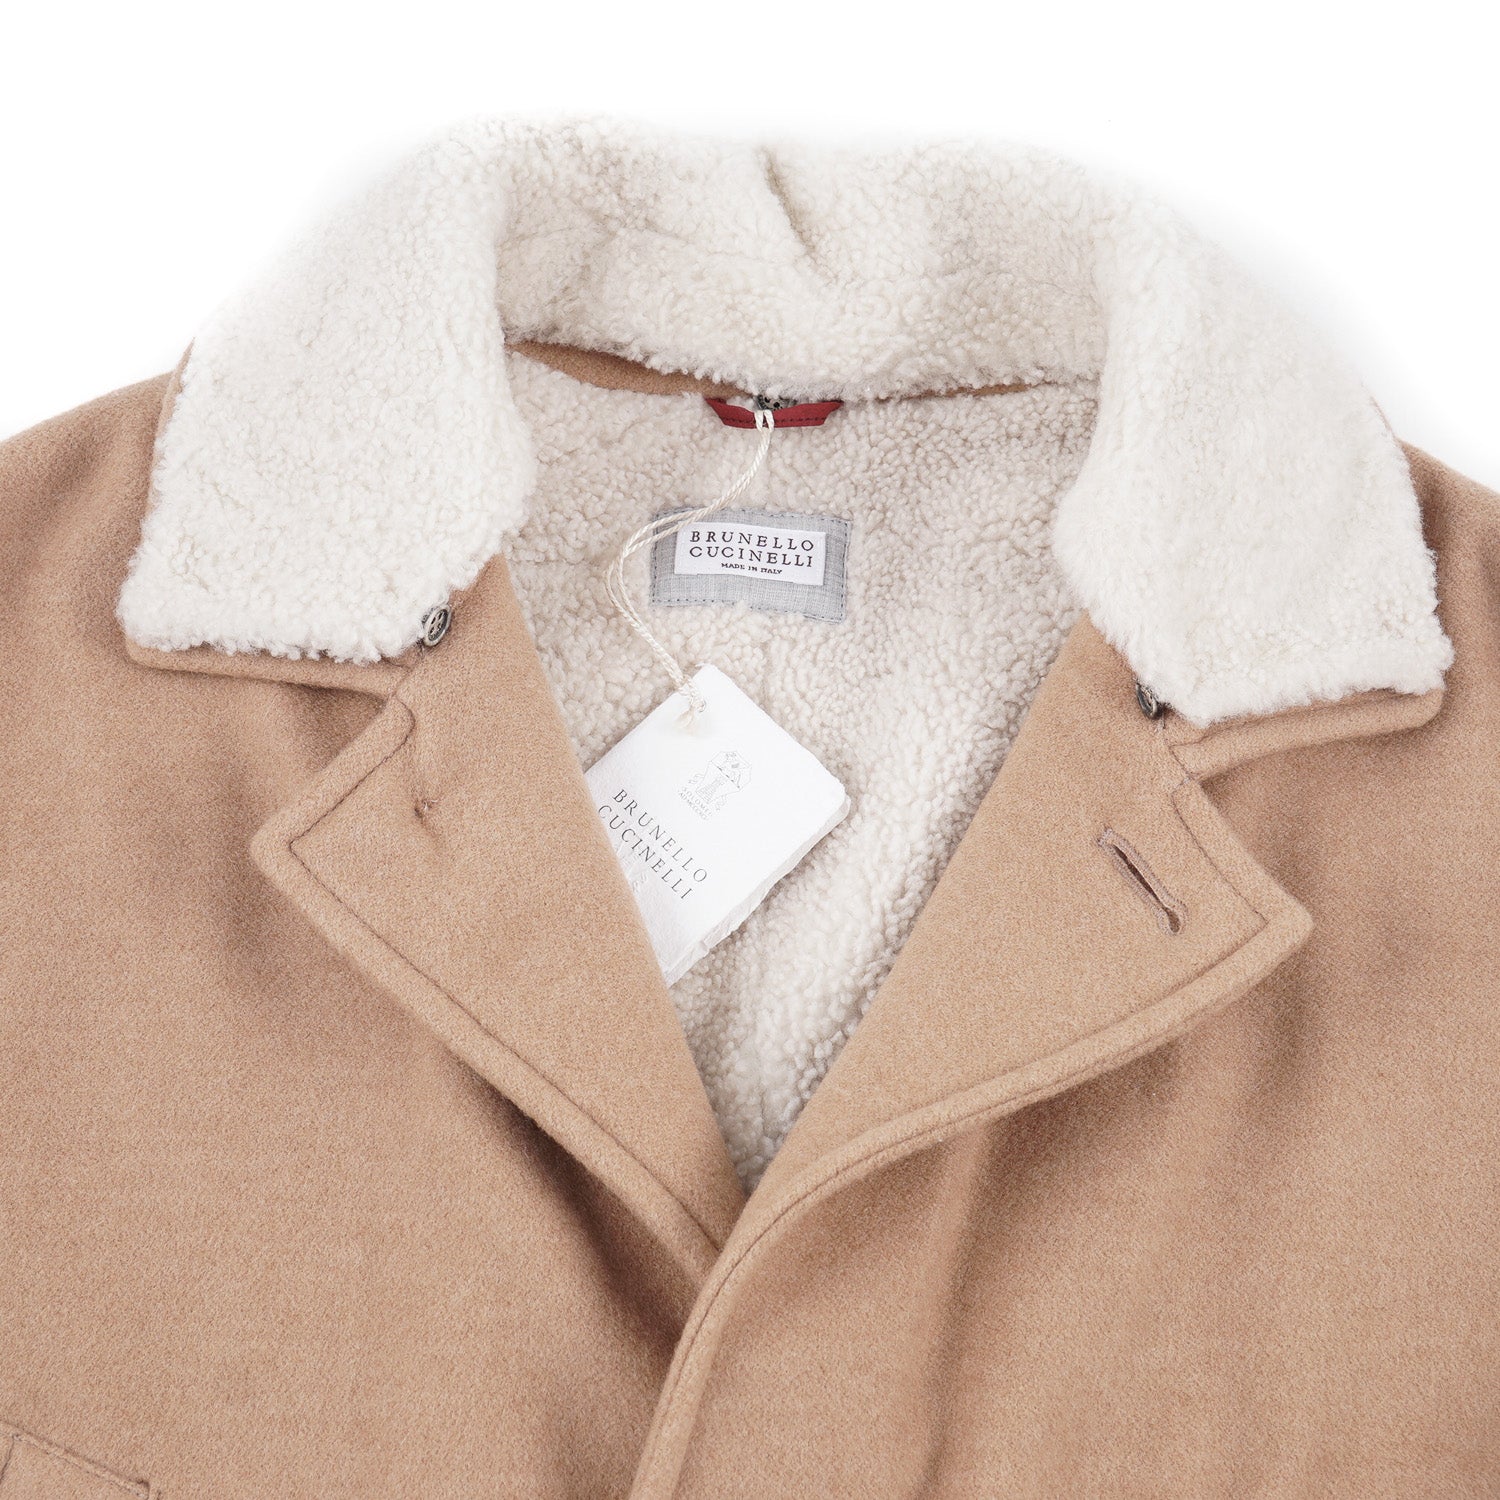 Brunello Cucinelli Cashmere Coat with Shearling Lining - Top Shelf Apparel